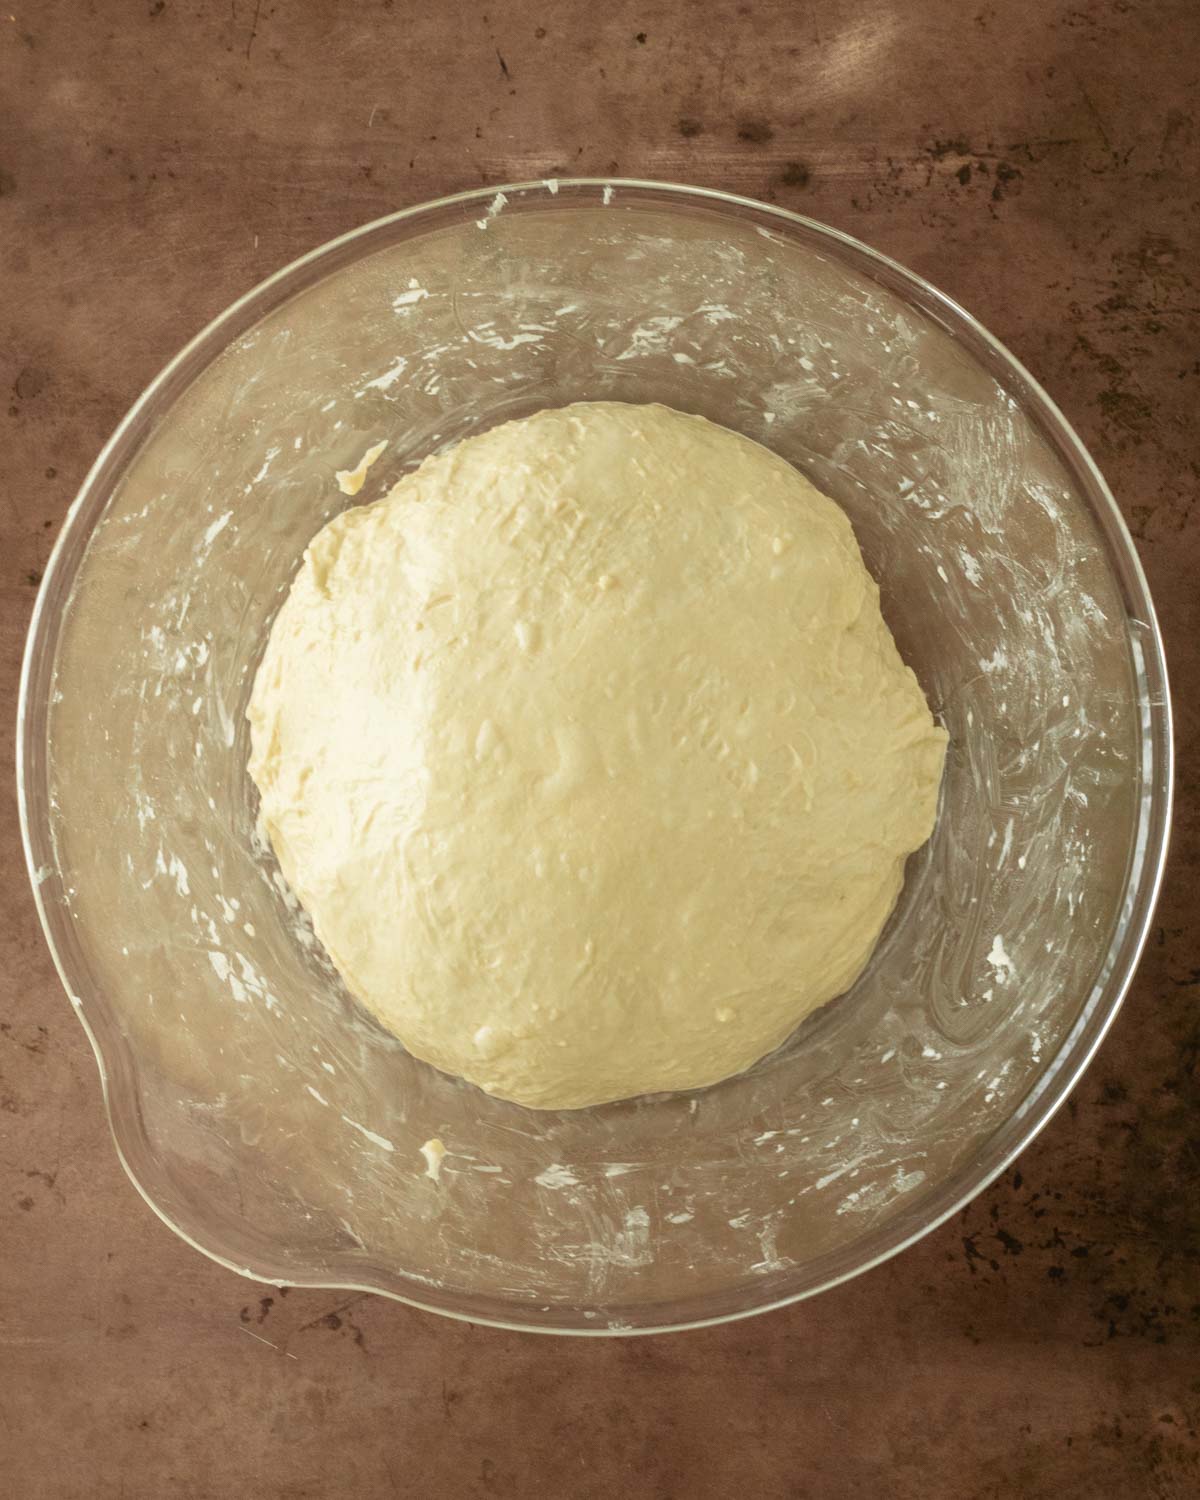 Step 8. Stretch and fold the dough